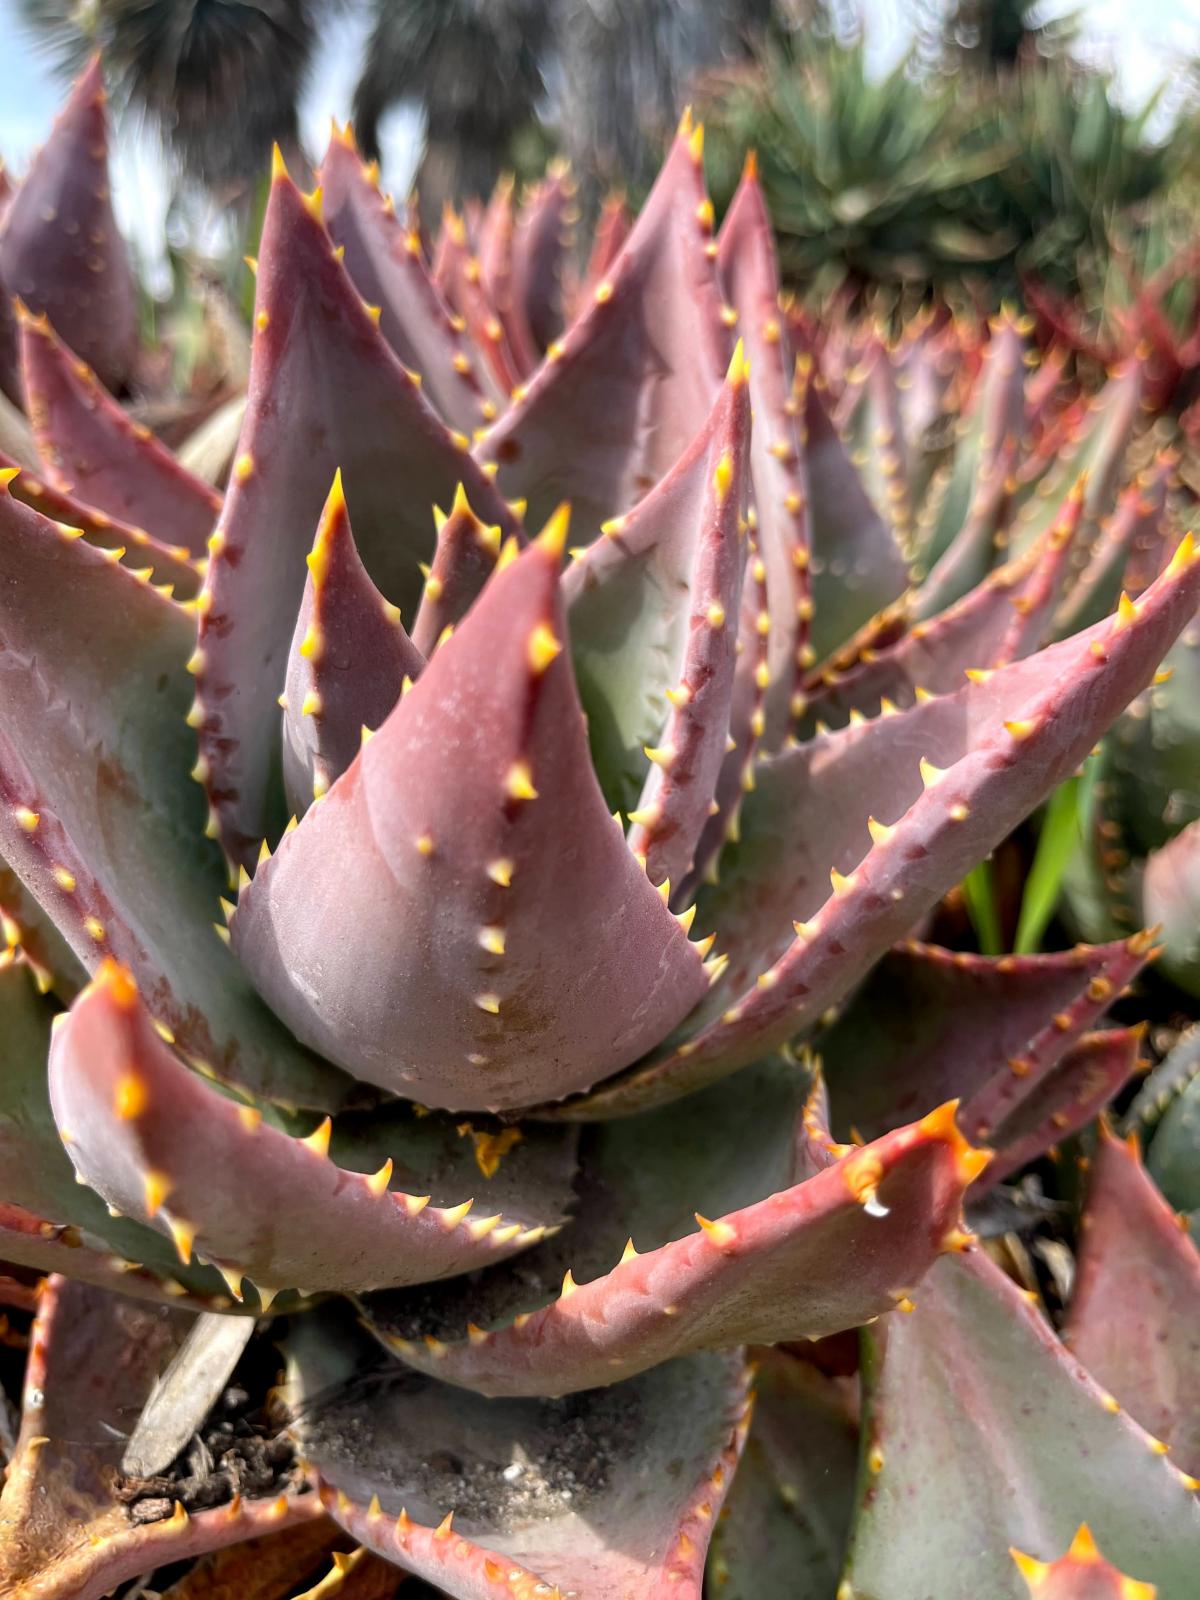 Plant with reddish grey succulent leaves. The leaves have yellow teeth on the edges and on the underside ridge.